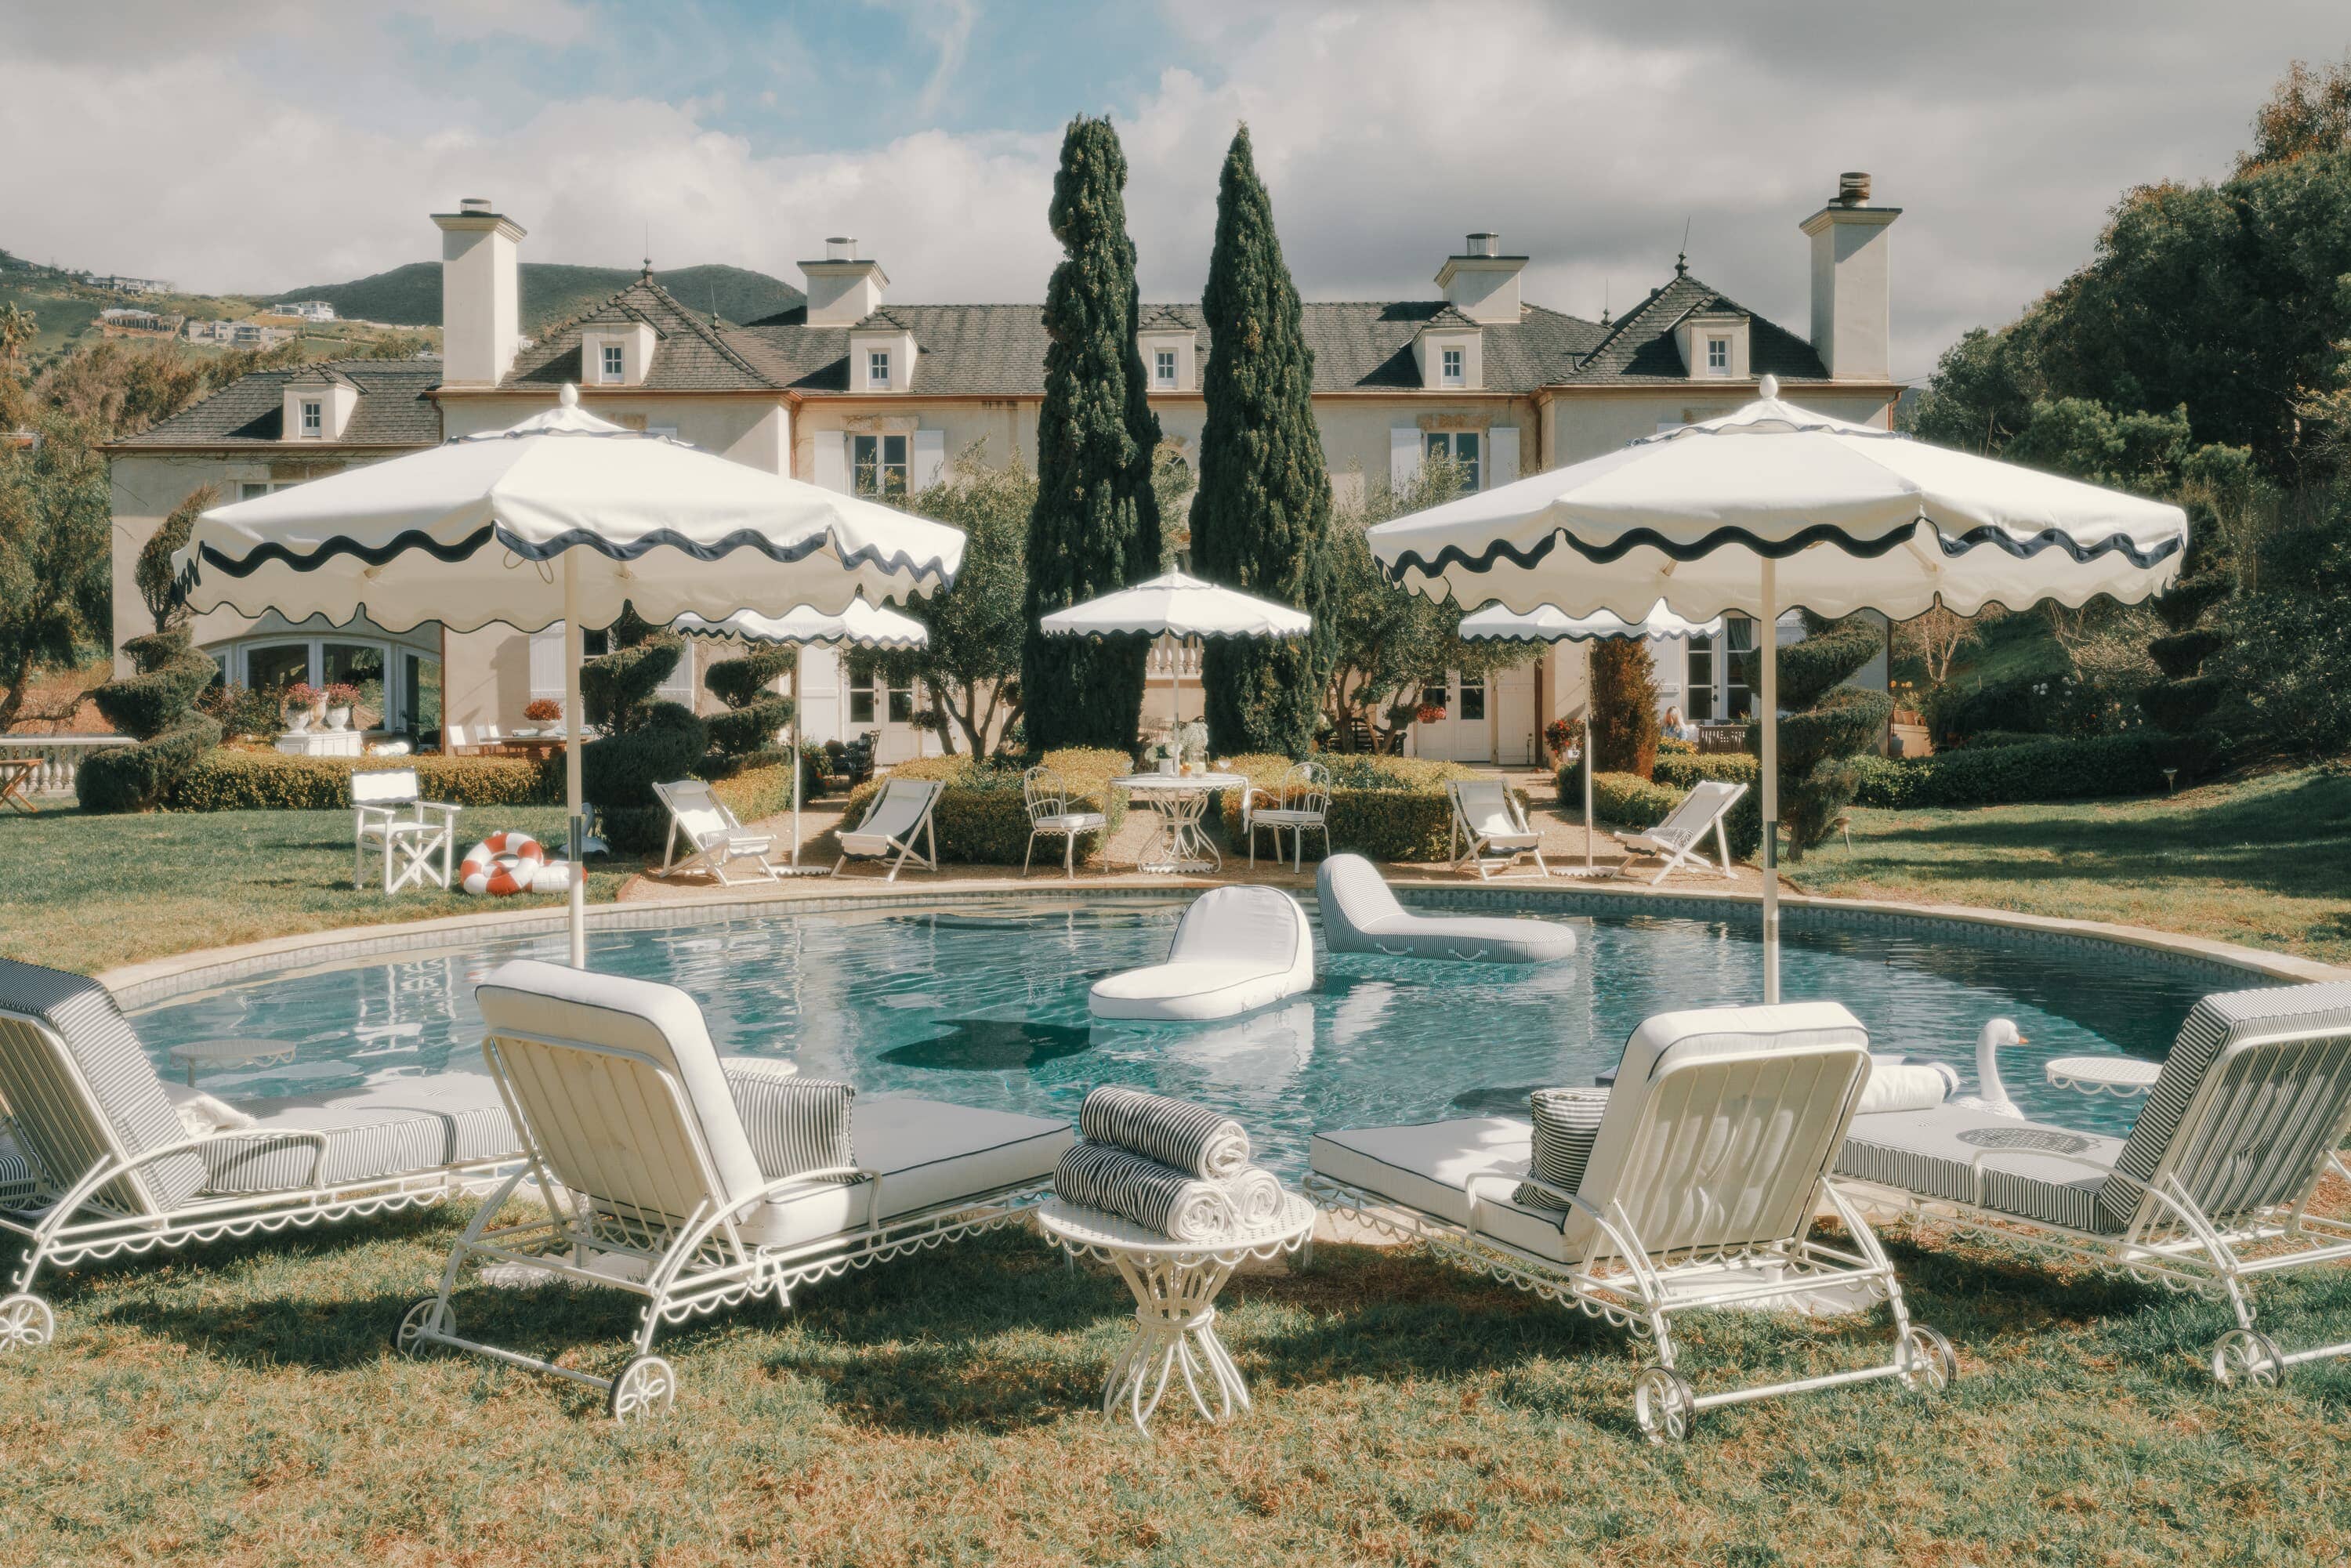 Pool setting with white navy sun loungers, white umbrellas and pool floats